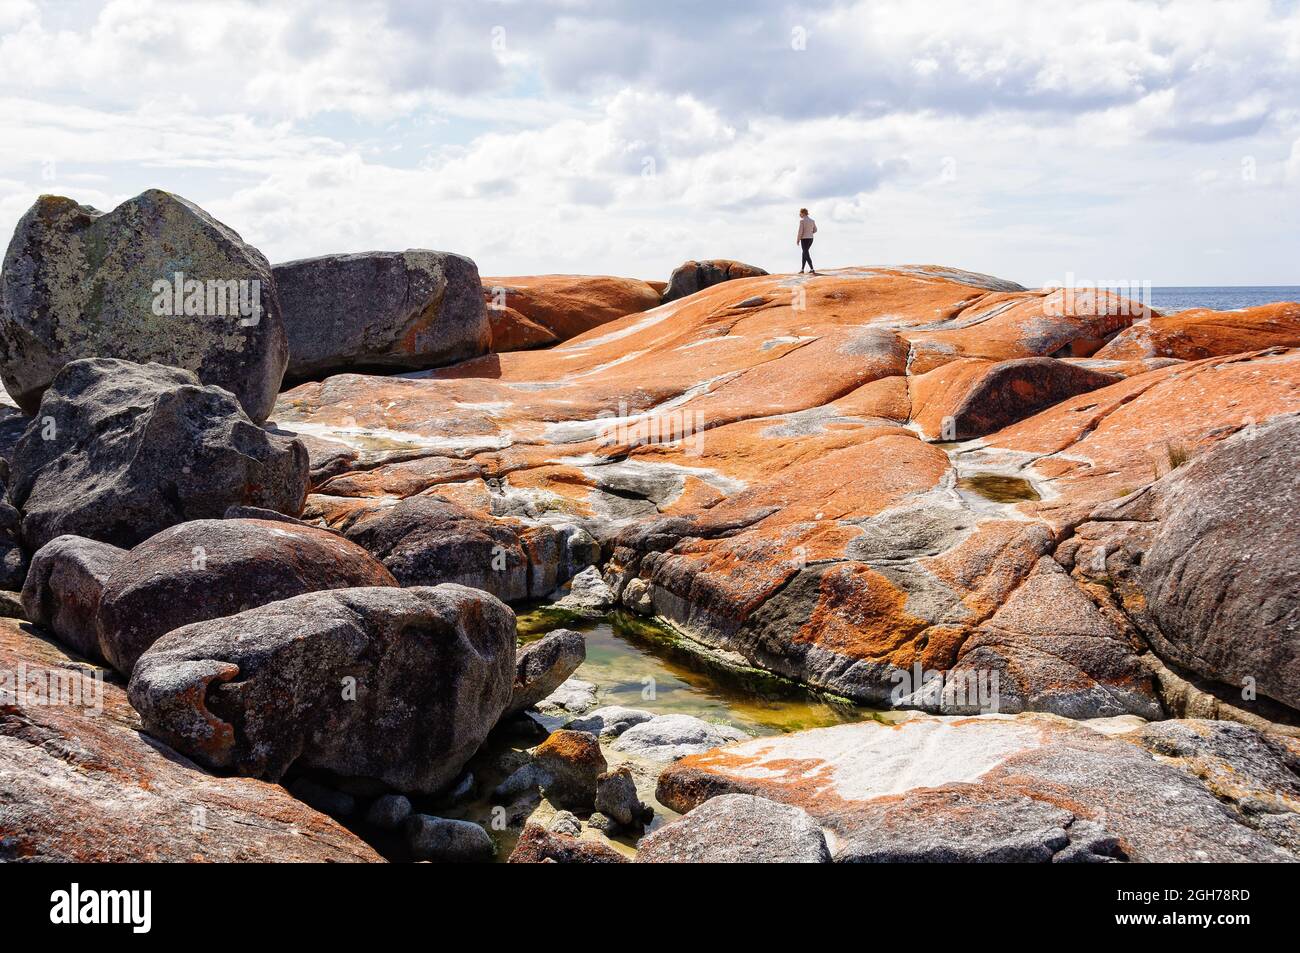 A tourist admires the view from the top of orange lichen-covered granite boulders in Bay of Fires - The Gardens, Tasmania, Australia Stock Photo